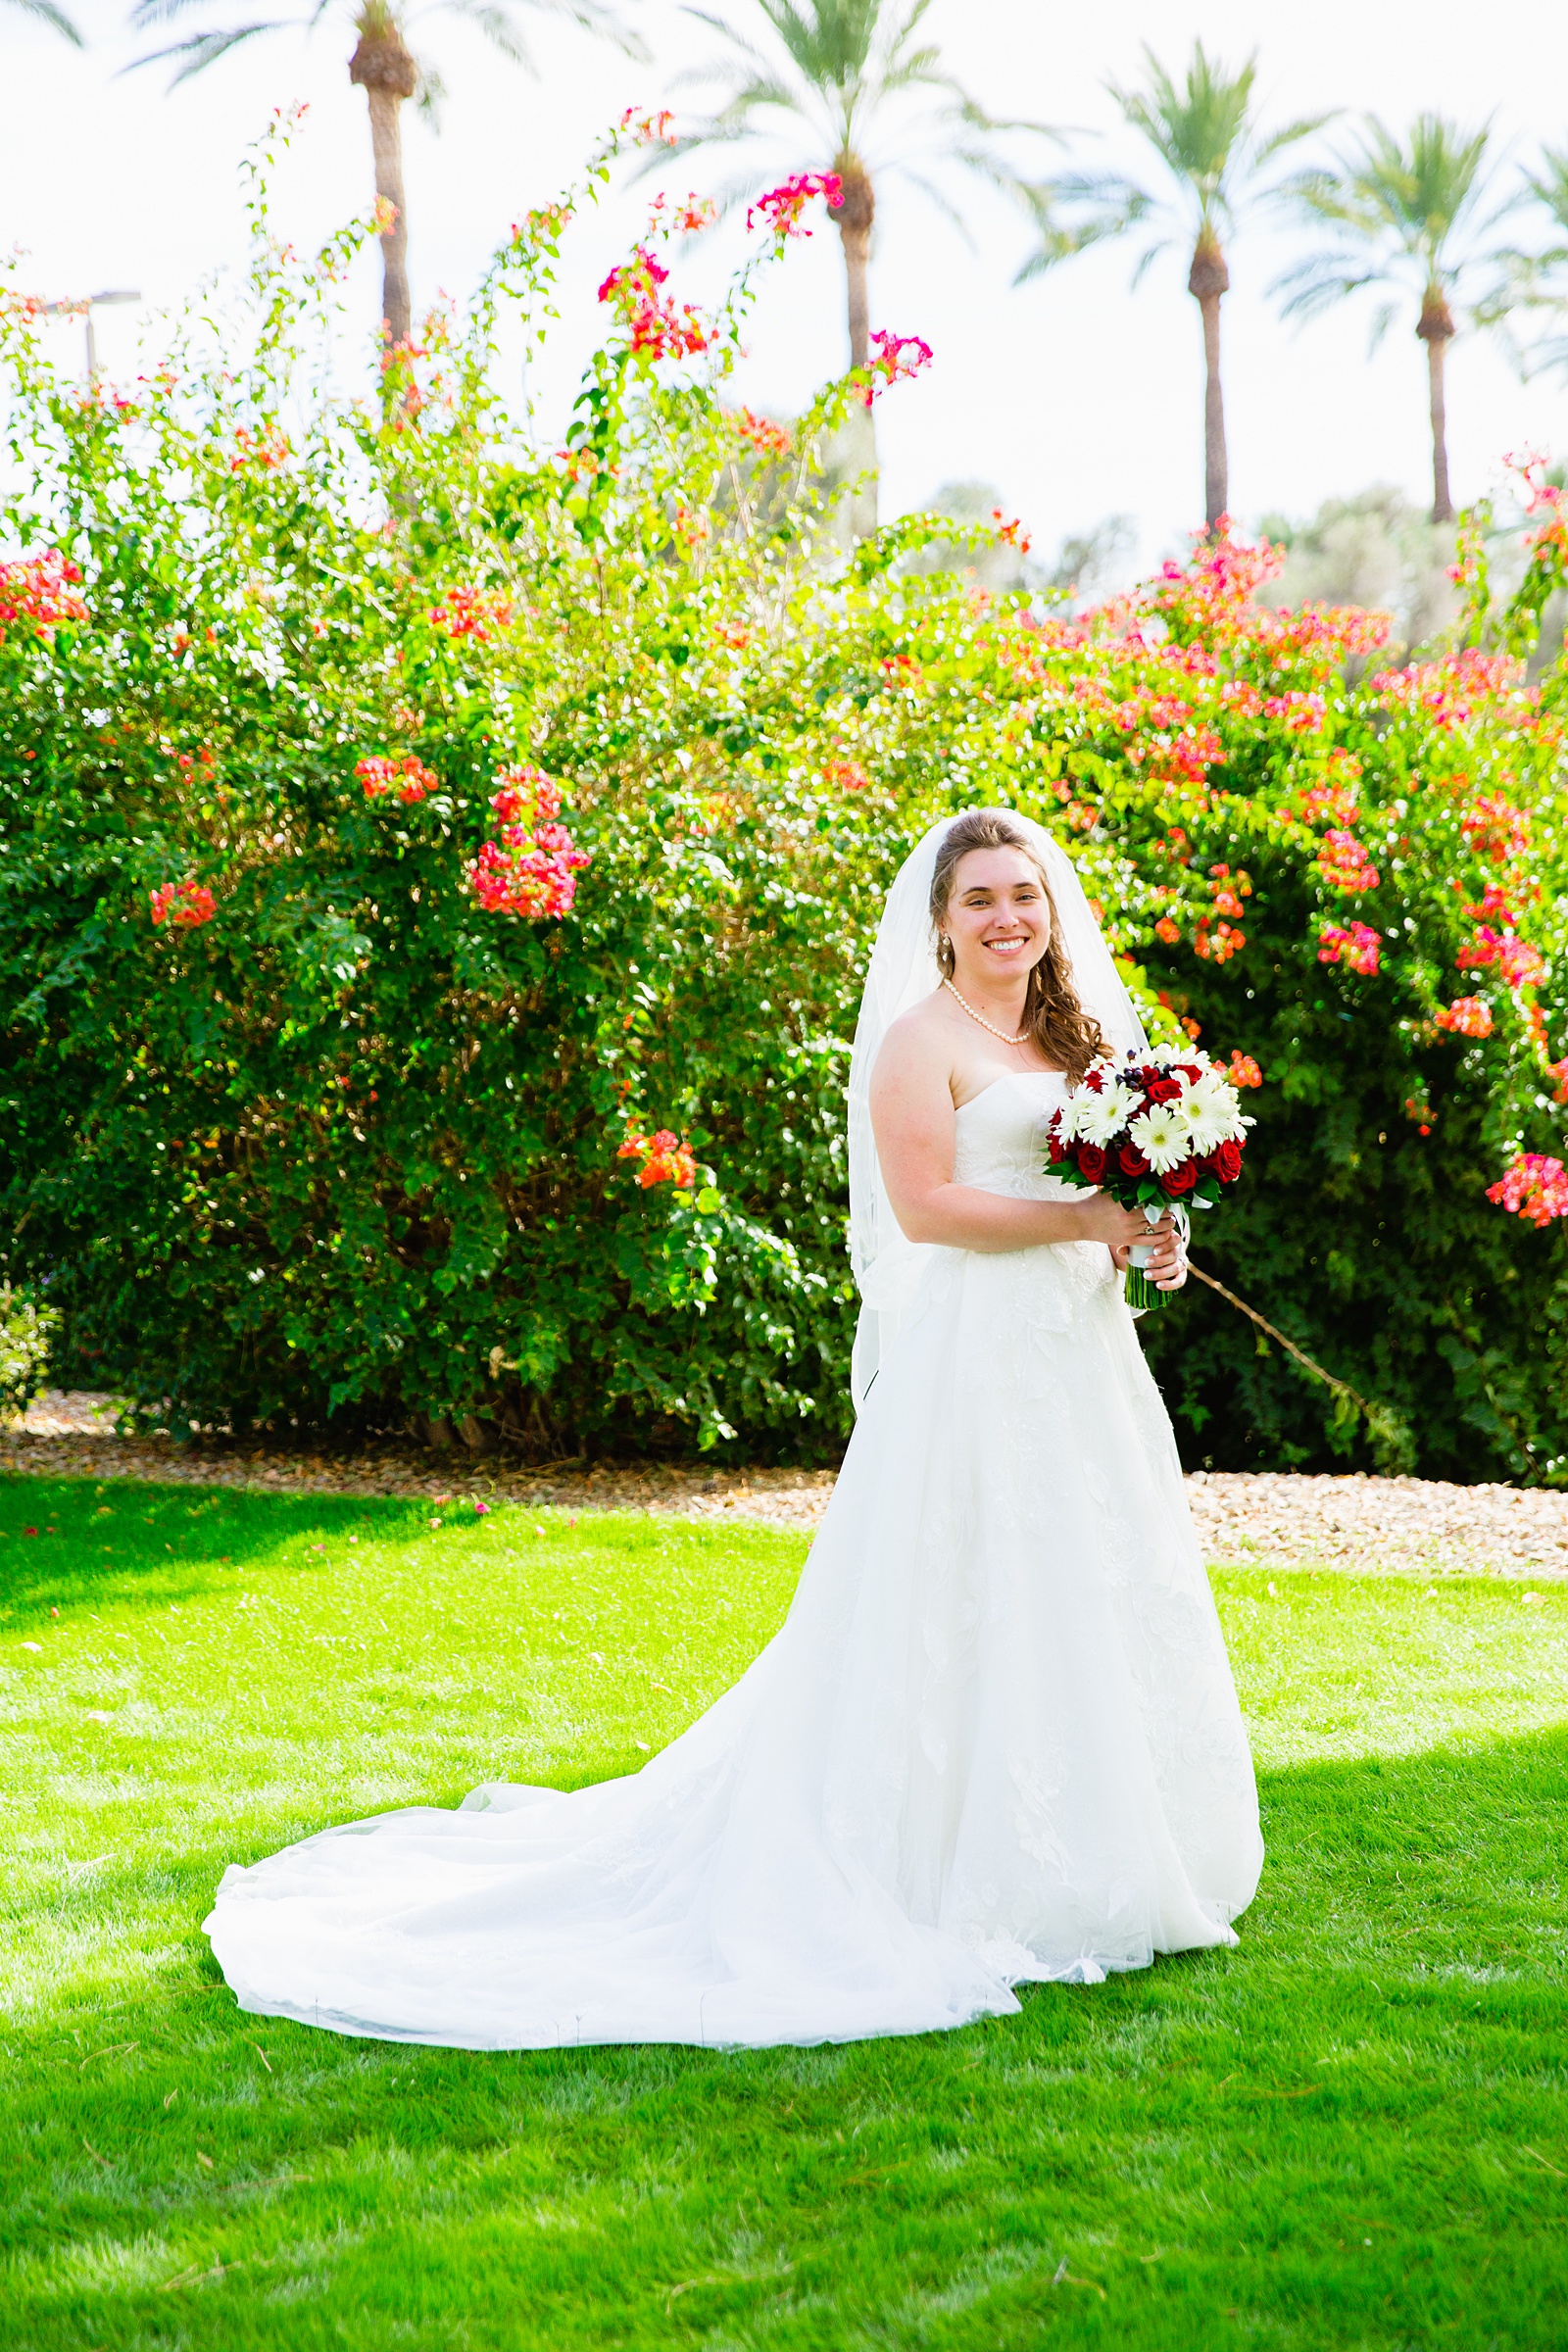 Bride's romantic lace wedding dress for her Ocotillo Oasis wedding by PMA Photography.